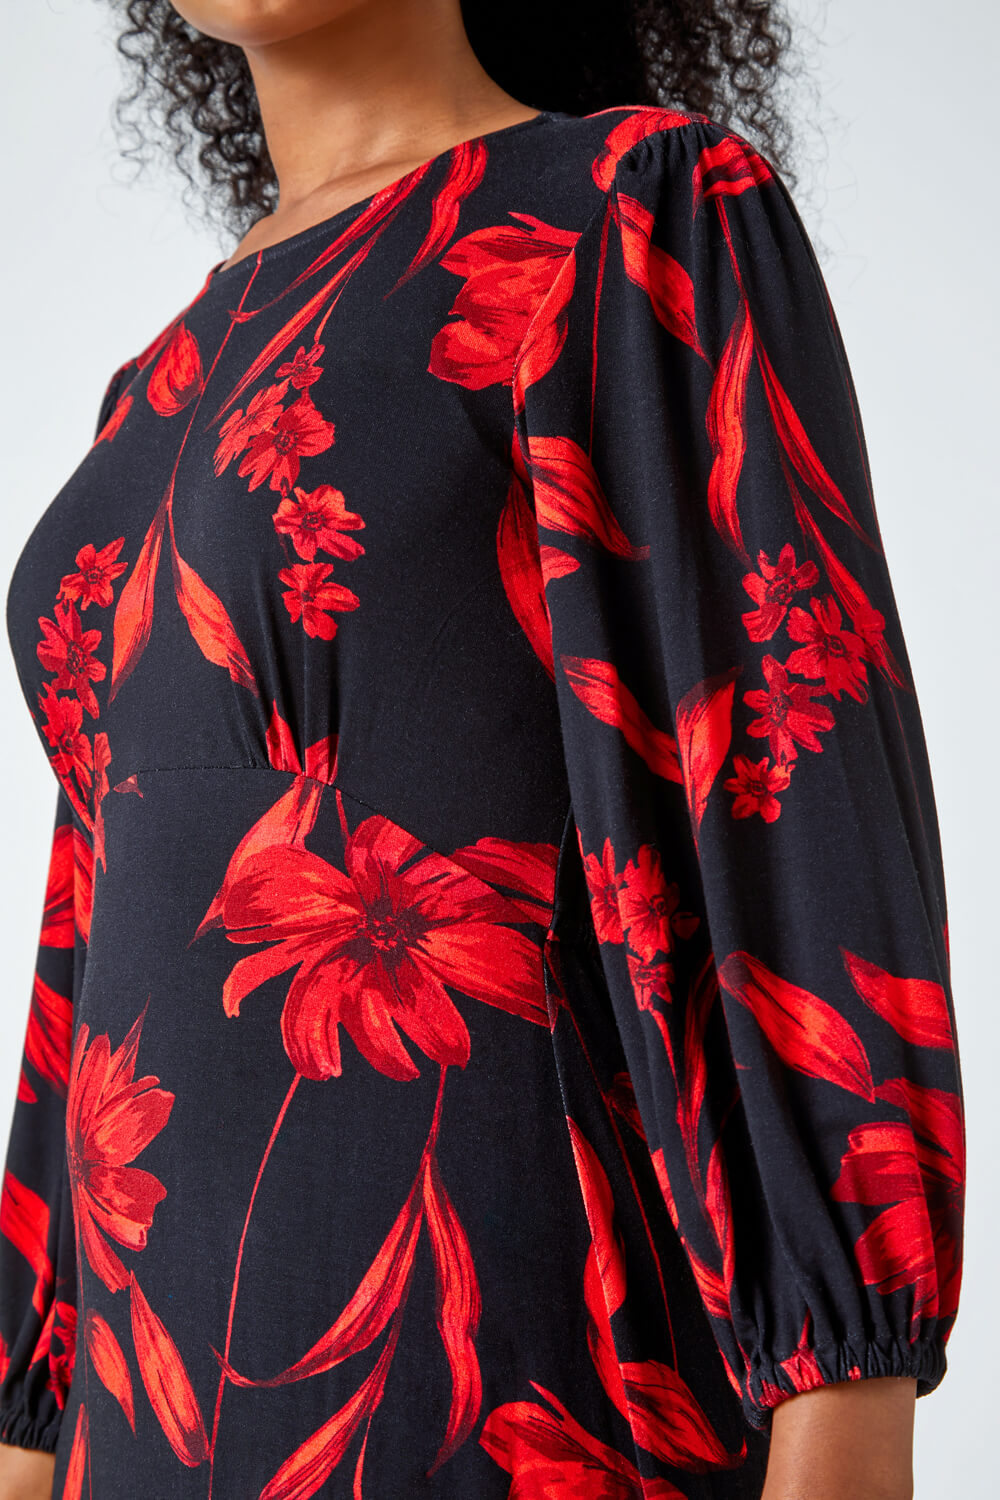 Red Petite Floral Stretch Midi Dress, Image 5 of 5